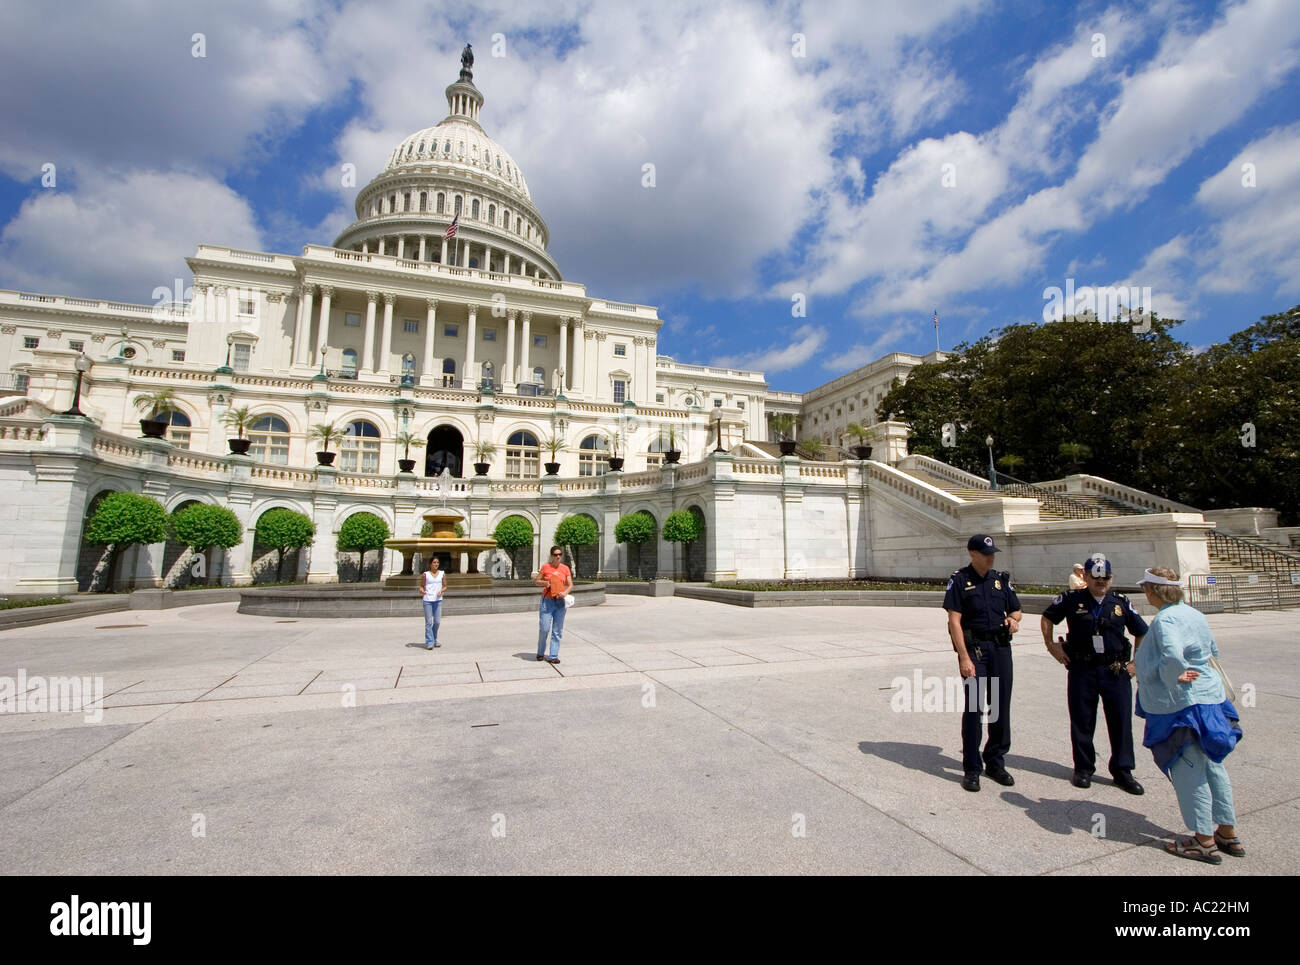 Two Capitol Police talk with a woman at the United States Capitol Building in Washington, D.C. Stock Photo